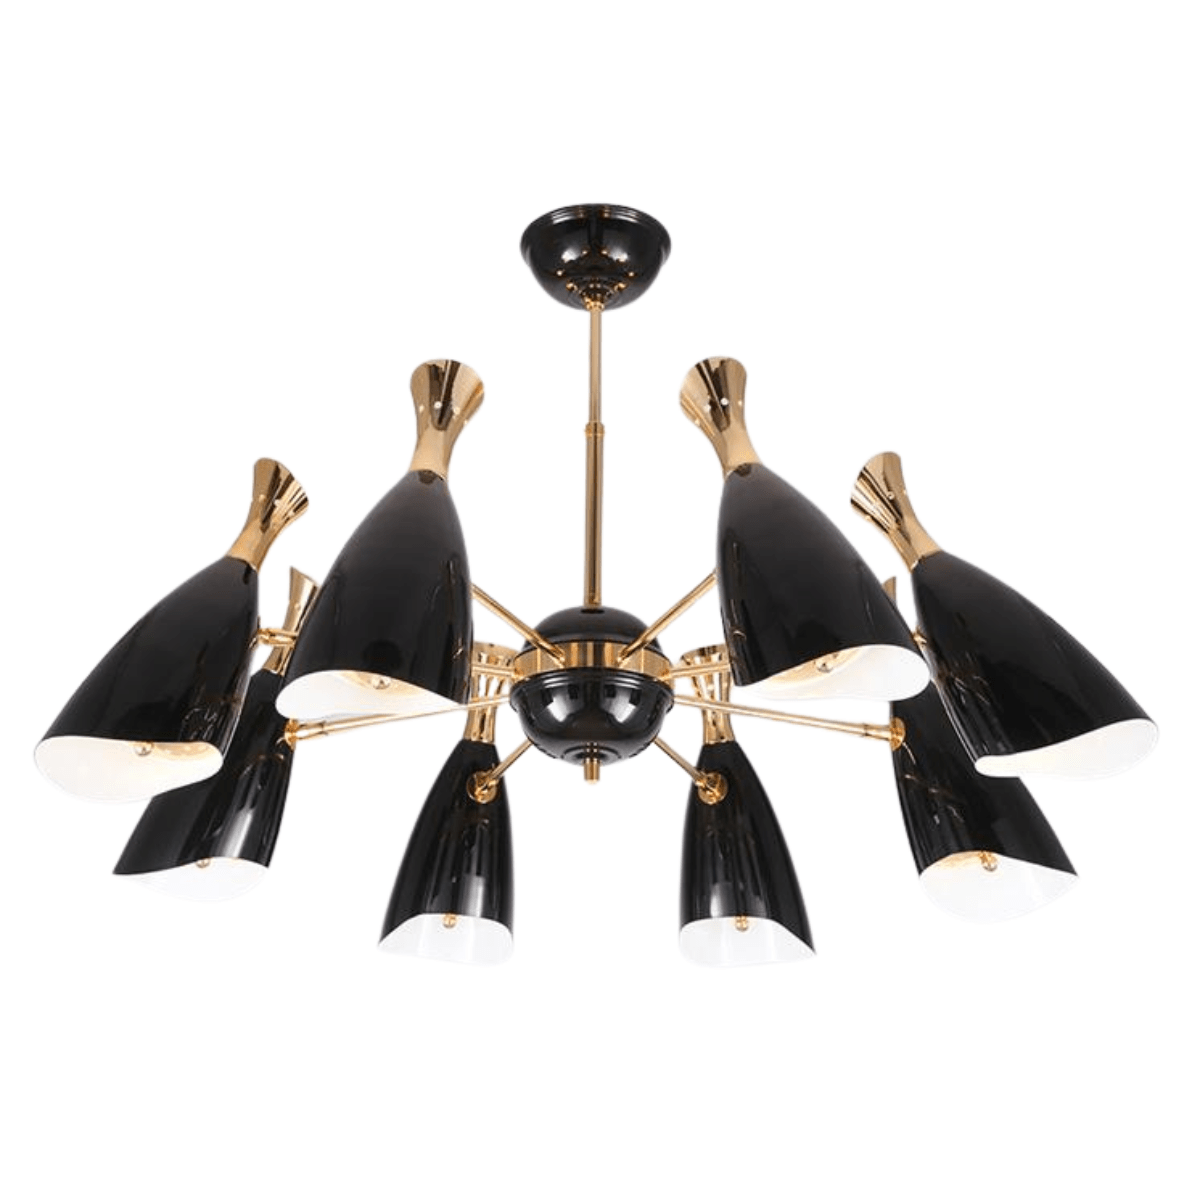 Buy Luxury Modern LED Horn-Shaped 8 Heads Ceiling Pendant Chandelier 100cm - CL-15-8 | Shop at Supply Master Accra, Ghana Lamps & Lightings Buy Tools hardware Building materials